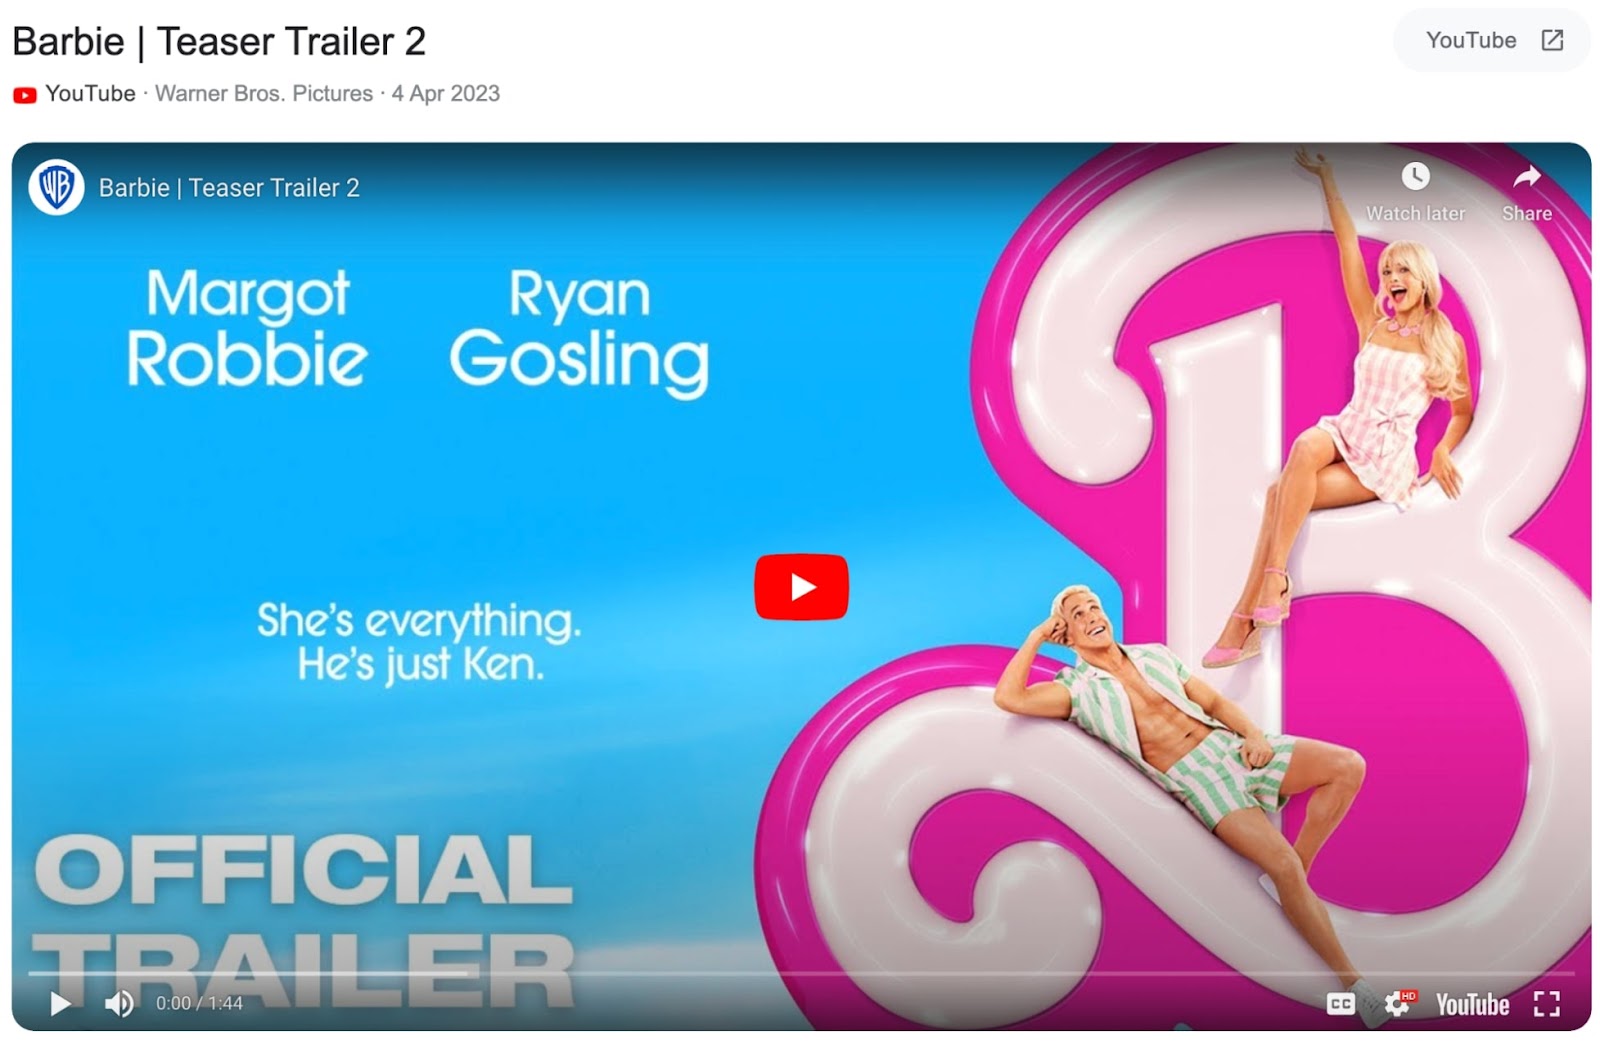 Barbie Teaser Trailer 2 YouTube preview